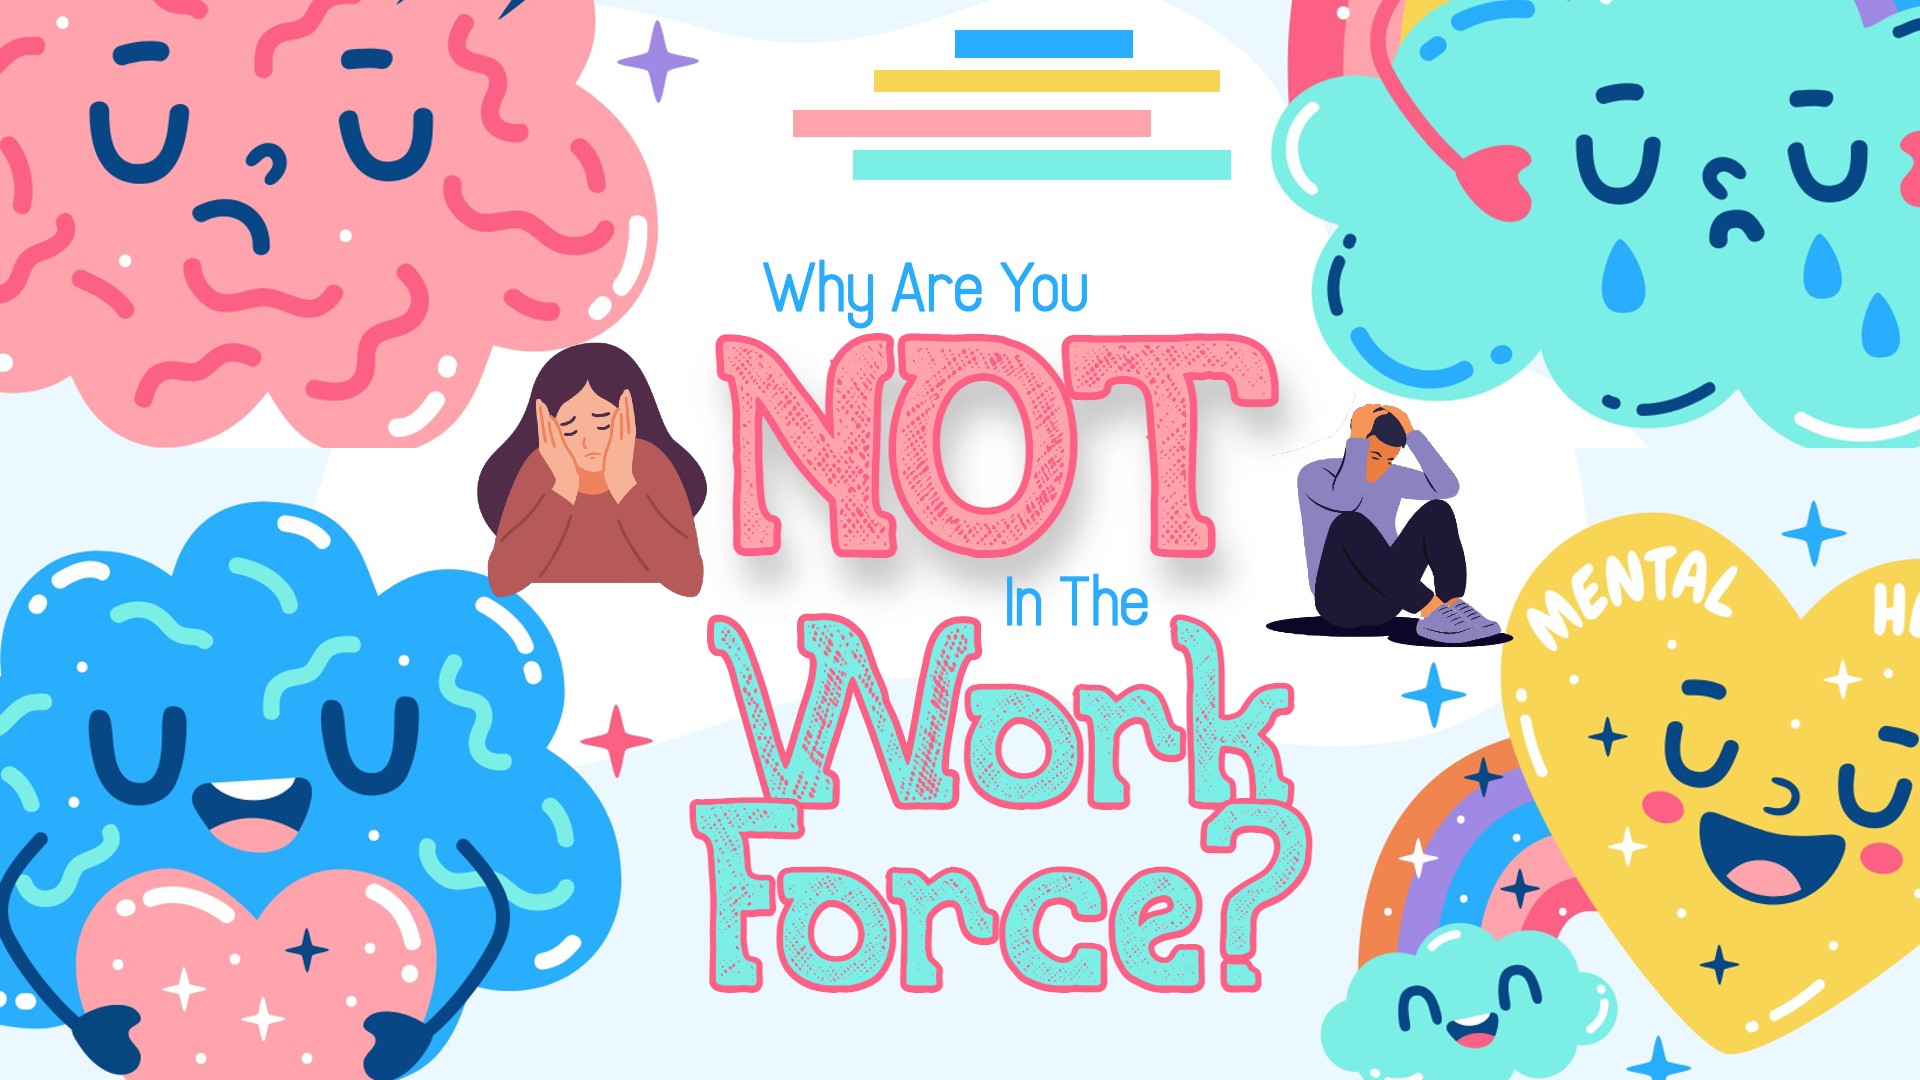 Why Are You NOT in the Work Force?